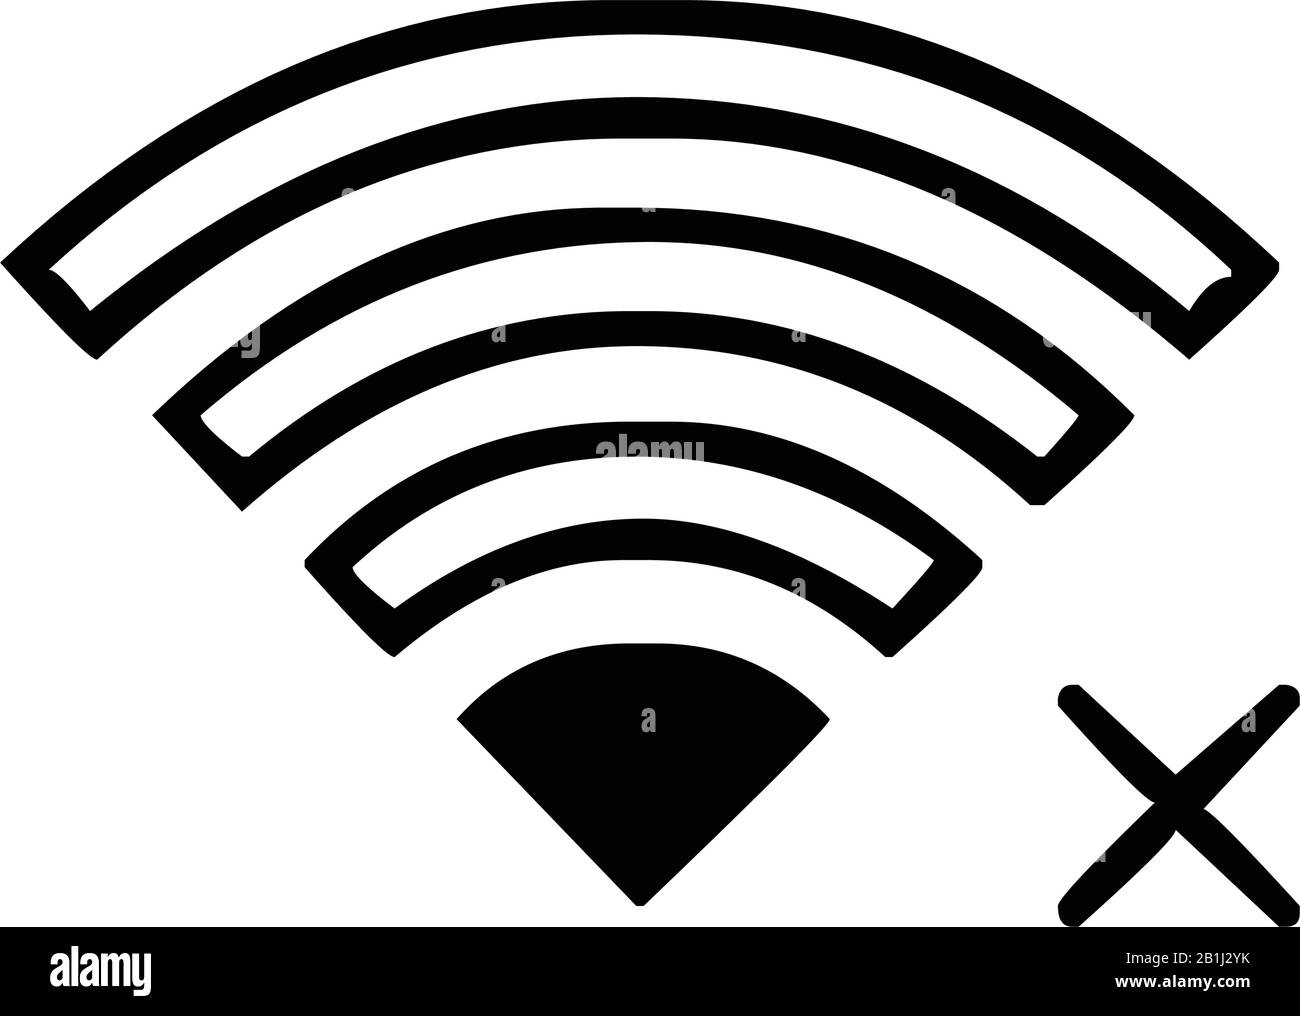 no wifi, wi-fi, wireless internet access symbol, outline, vector illustration, in black & white color, isolated on white background Stock Vector